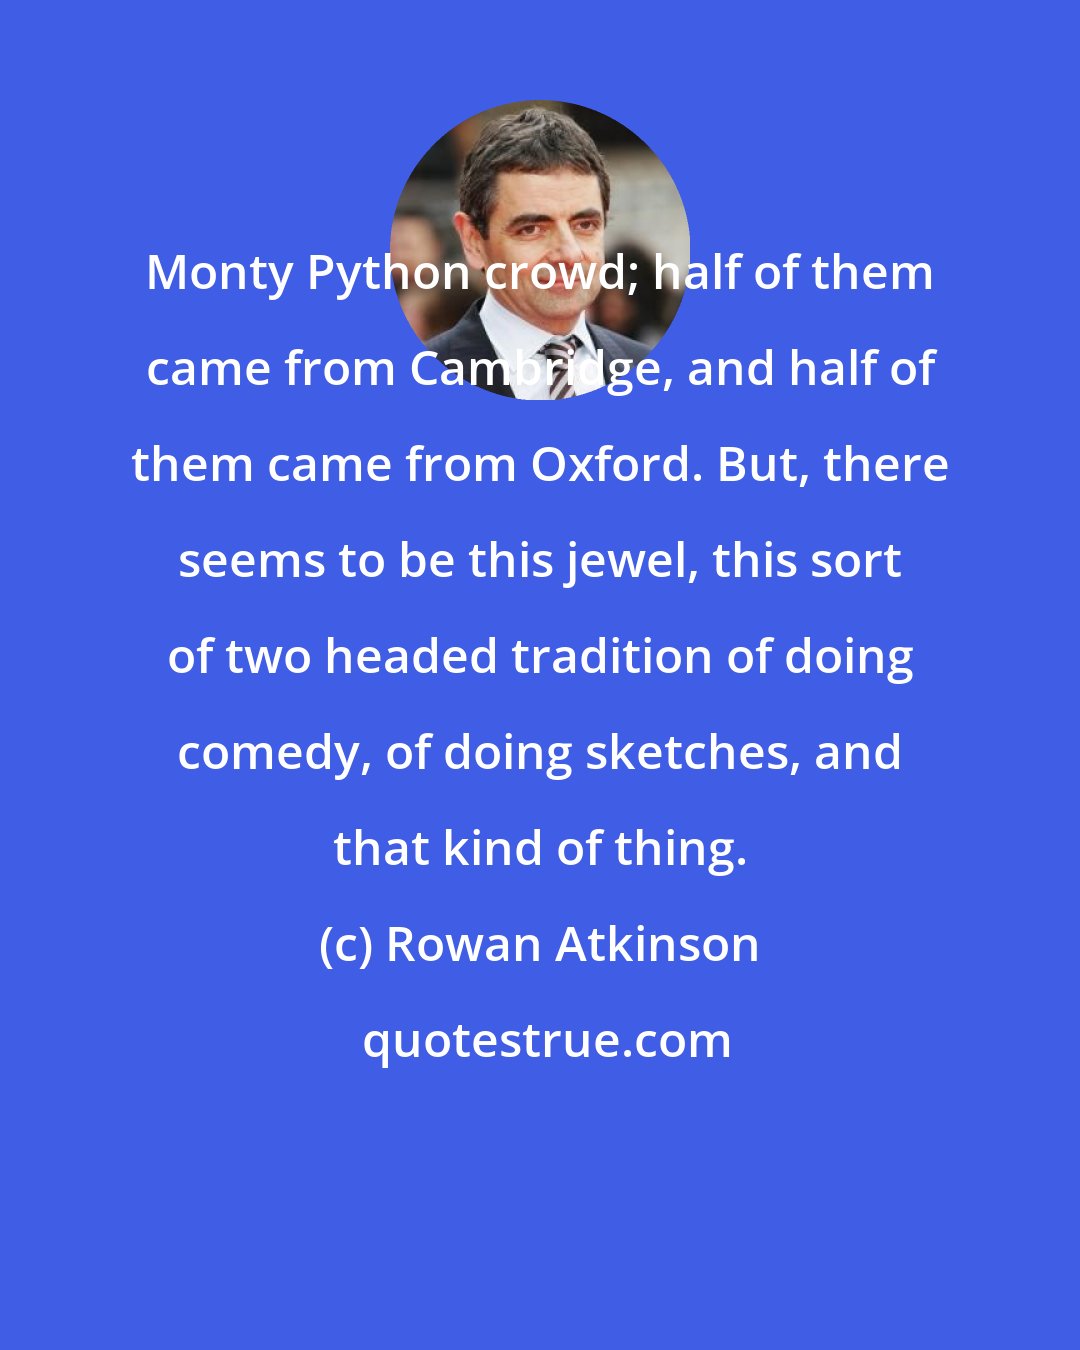 Rowan Atkinson: Monty Python crowd; half of them came from Cambridge, and half of them came from Oxford. But, there seems to be this jewel, this sort of two headed tradition of doing comedy, of doing sketches, and that kind of thing.